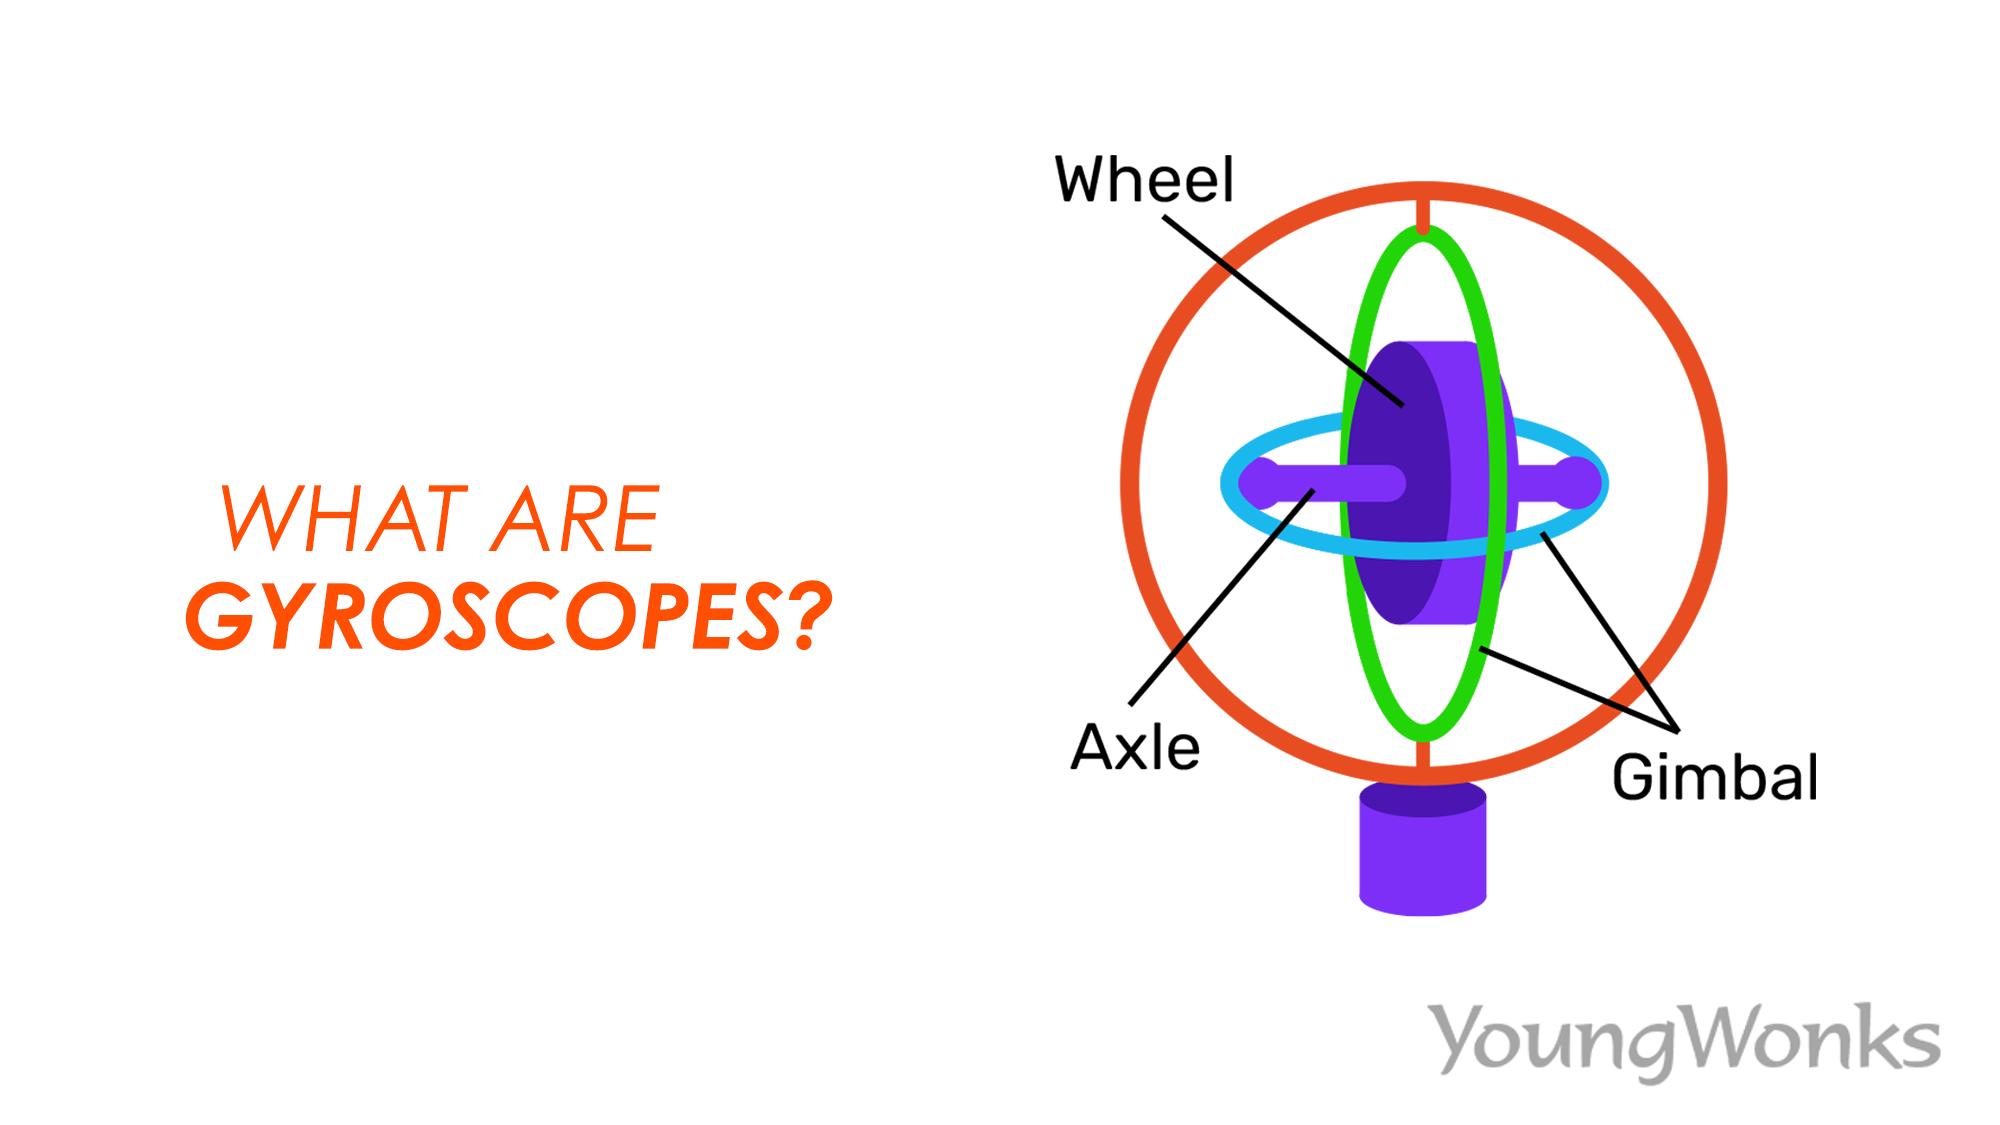 Everything you could possible want to know about gyroscopes